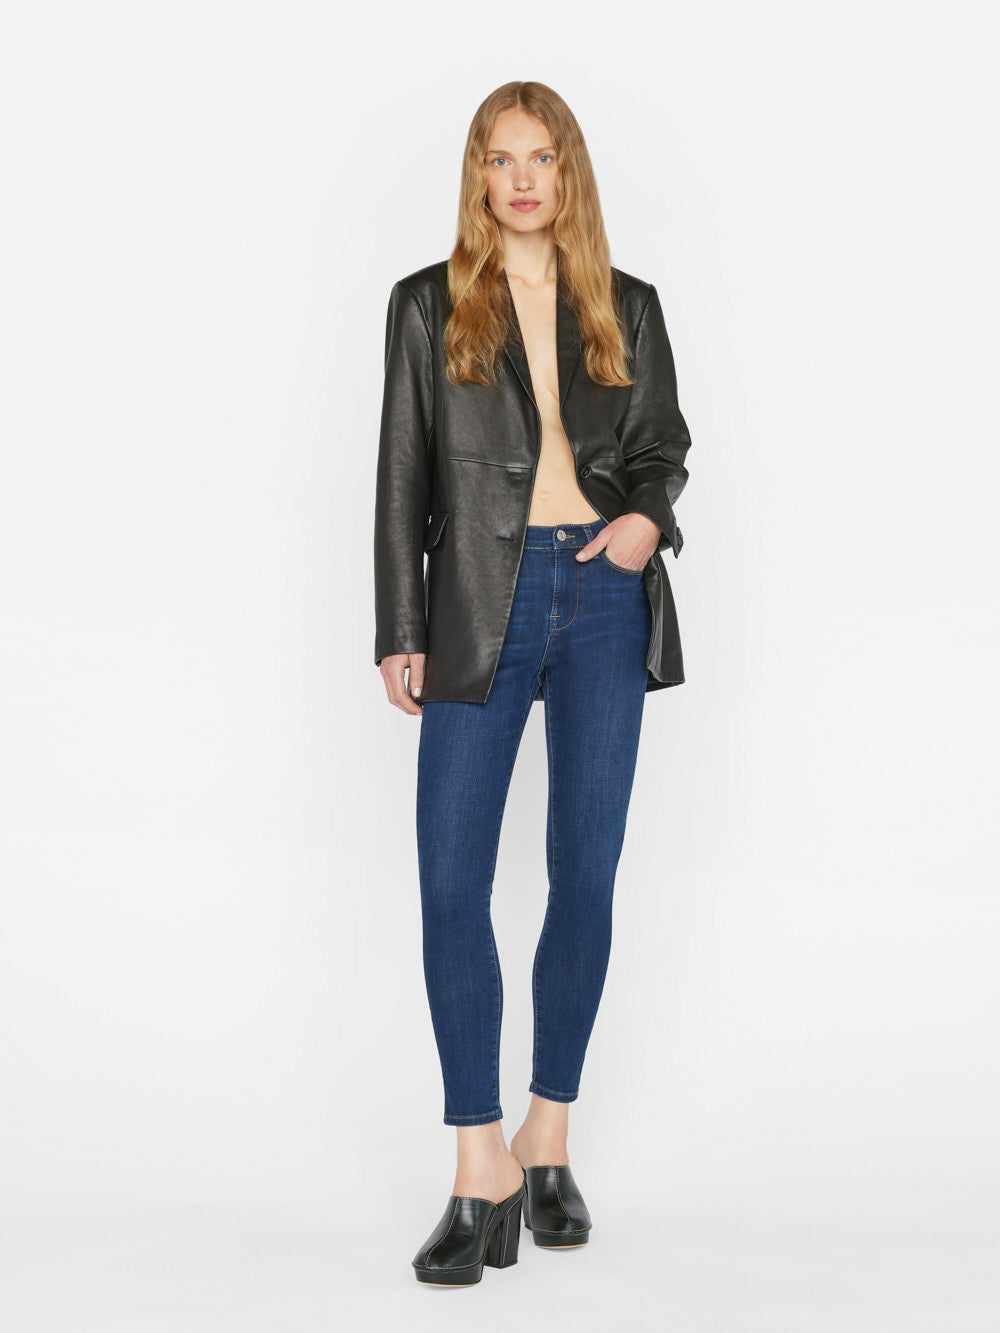 The model is wearing the Frame Le High Skinny Outseam Slit - Majesty jeans, a form-fitting silhouette made of sustainable stretch cotton blend and paired with a leather jacket.